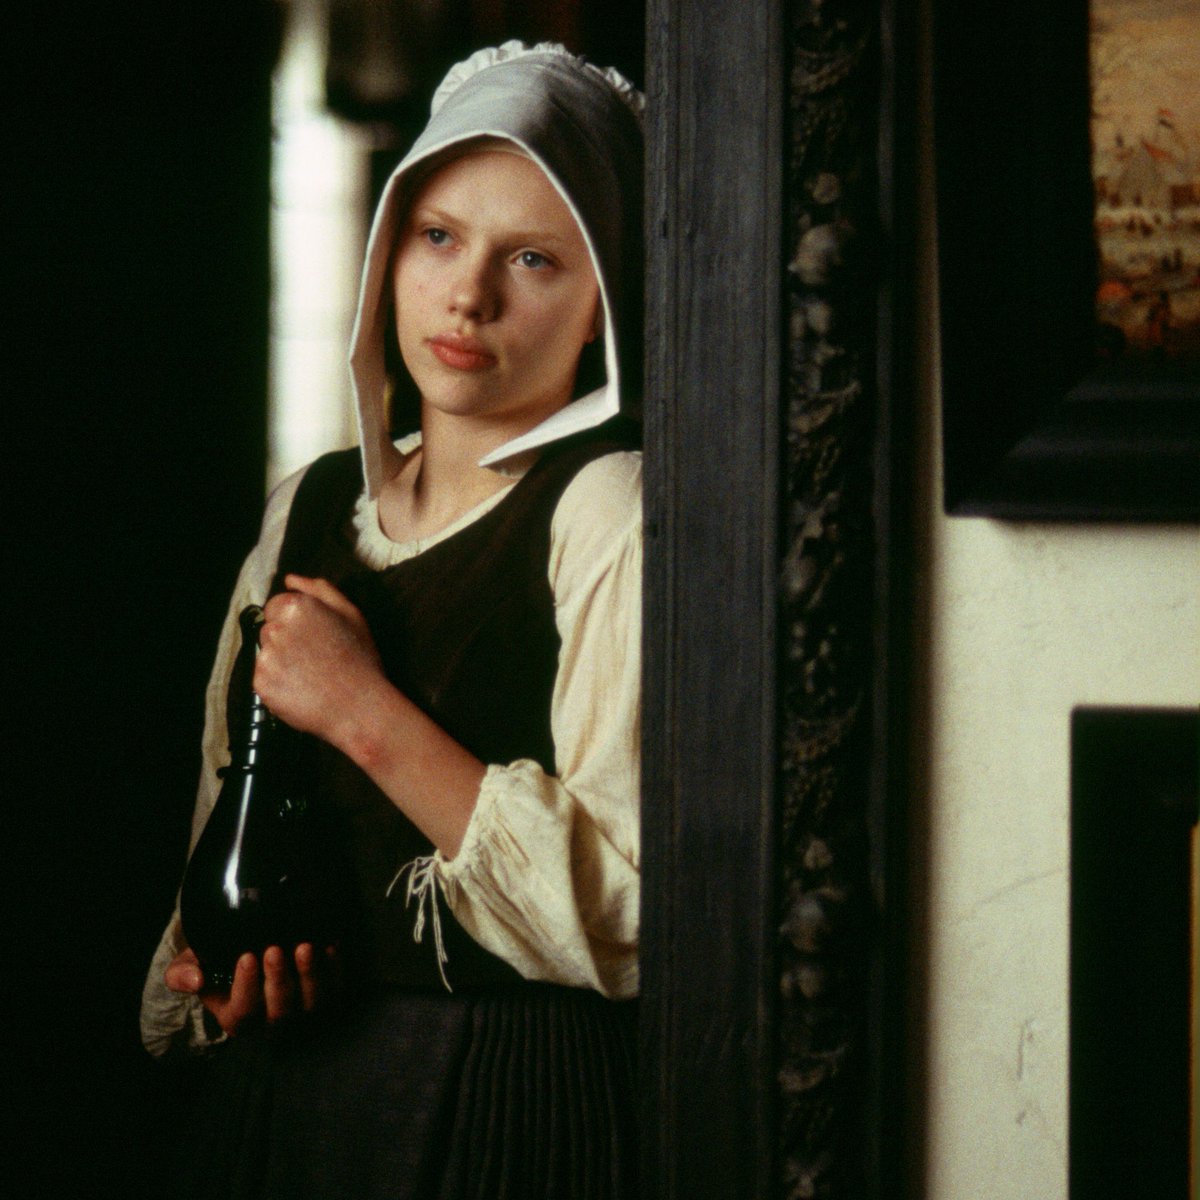 Saturday Night at the Movies | The Girl With A Pearl Earring | Season 2022  | PBS